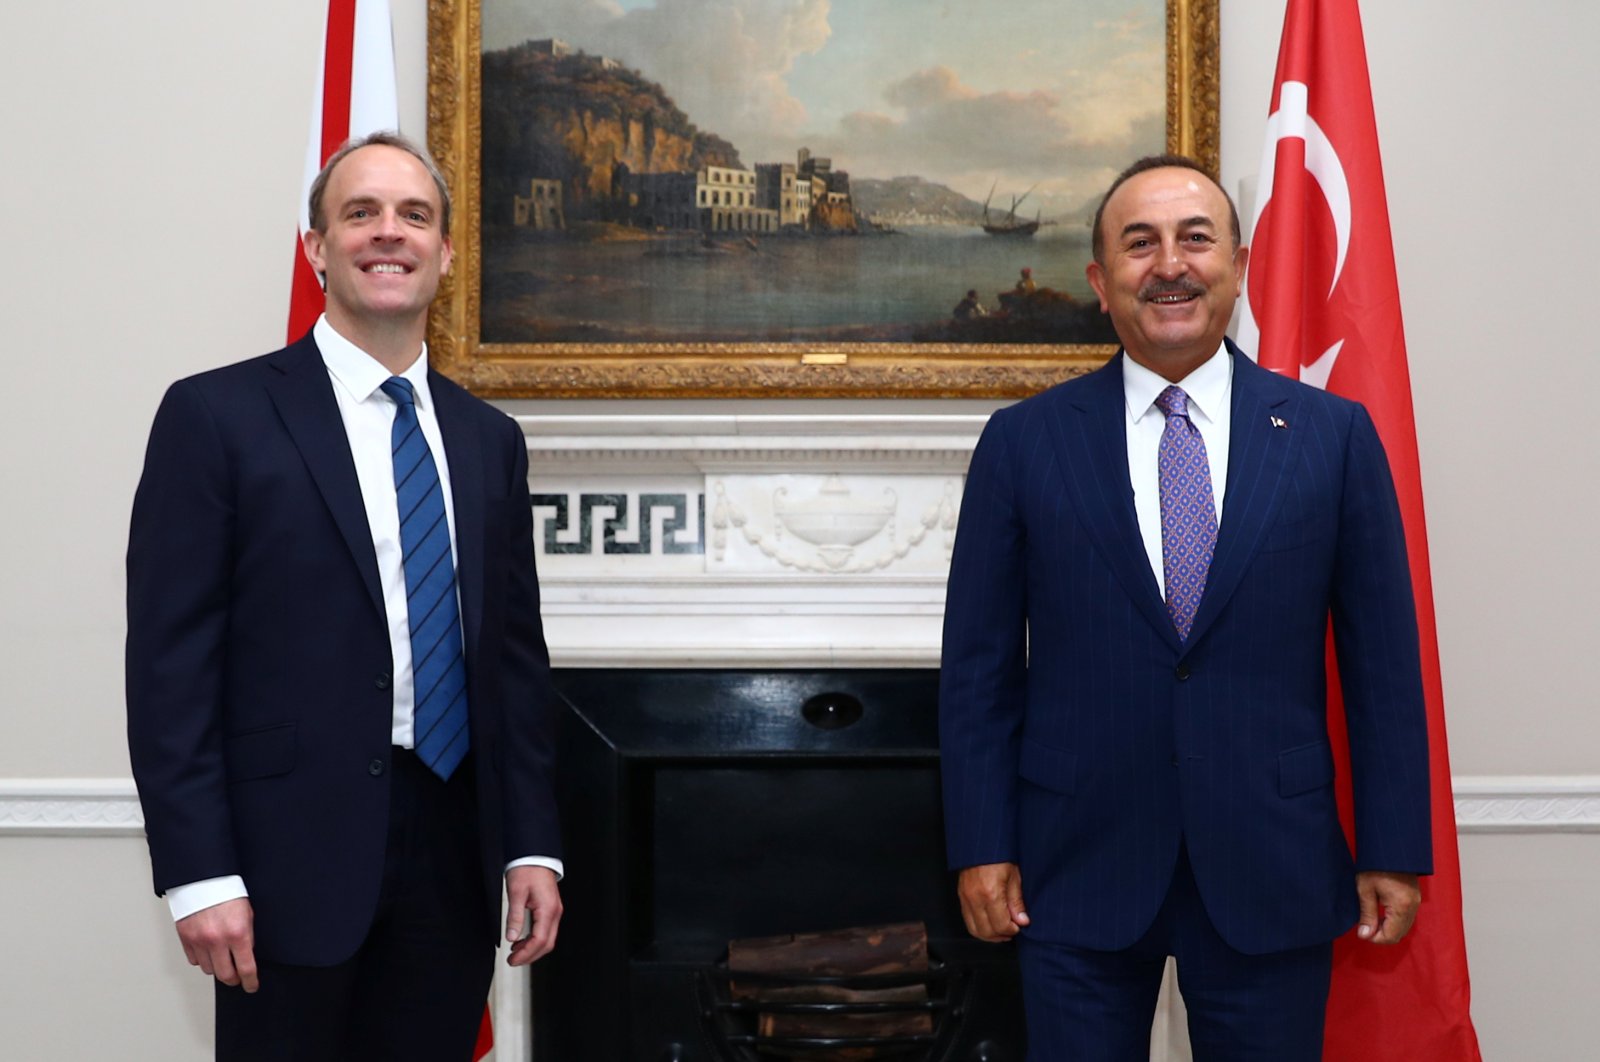 Britain's Foreign Secretary Dominic Raab (L) reacts as he poses for a photograph with Turkey's Foreign Minister Mevlüt Çavuşoğlu, at Carlton Gardens in London, on July 8, 2020. (AFP Photo)